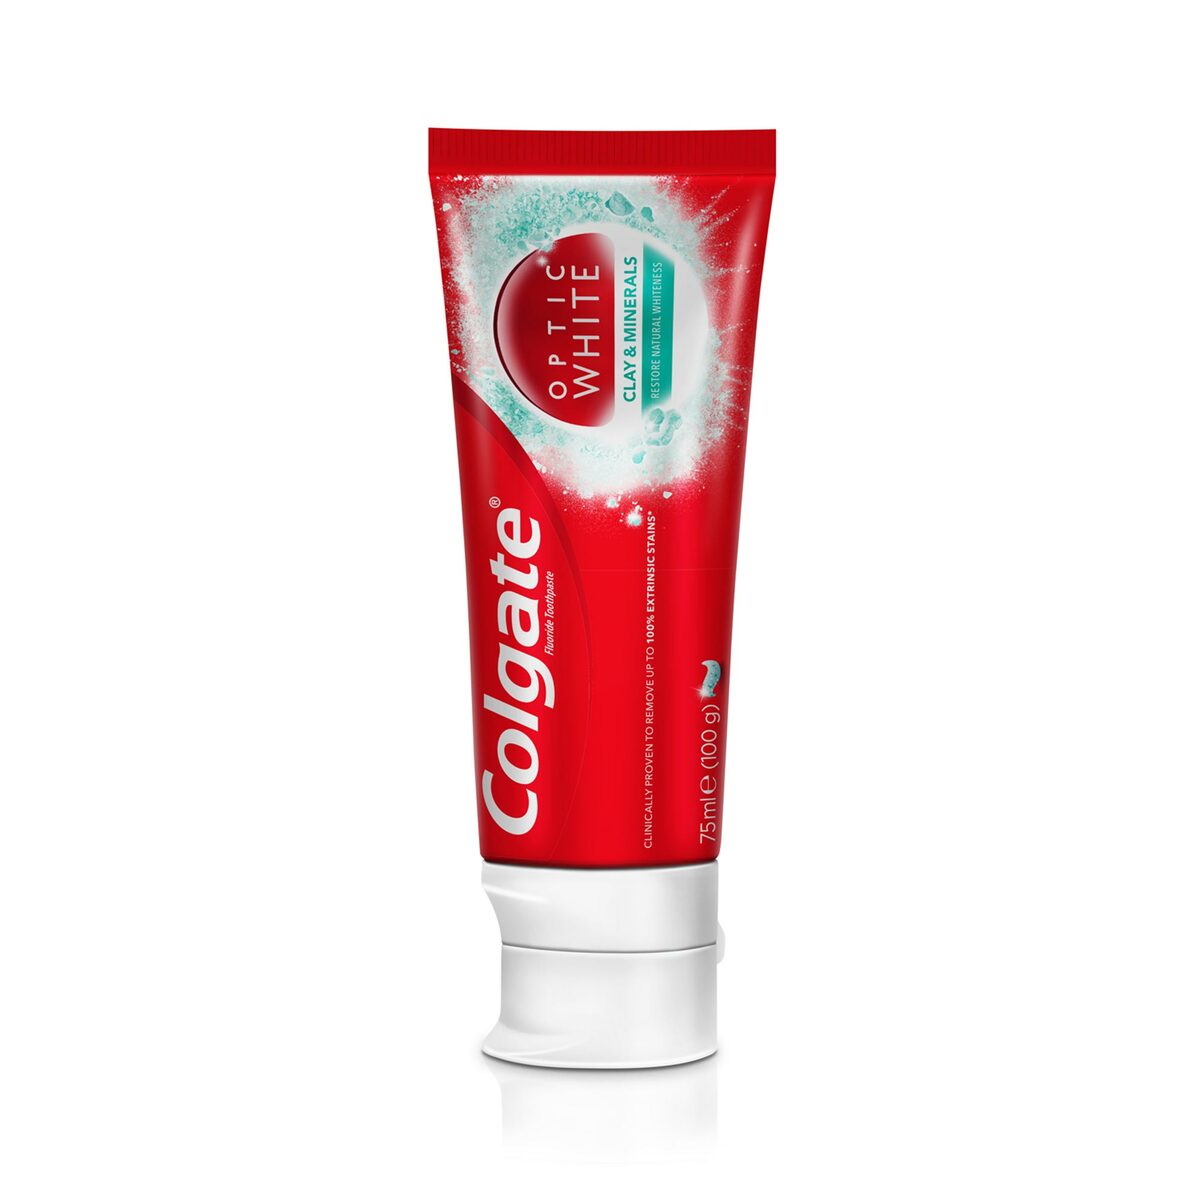 Colgate Toothpaste Optic White Clay & Minerals 75 ml